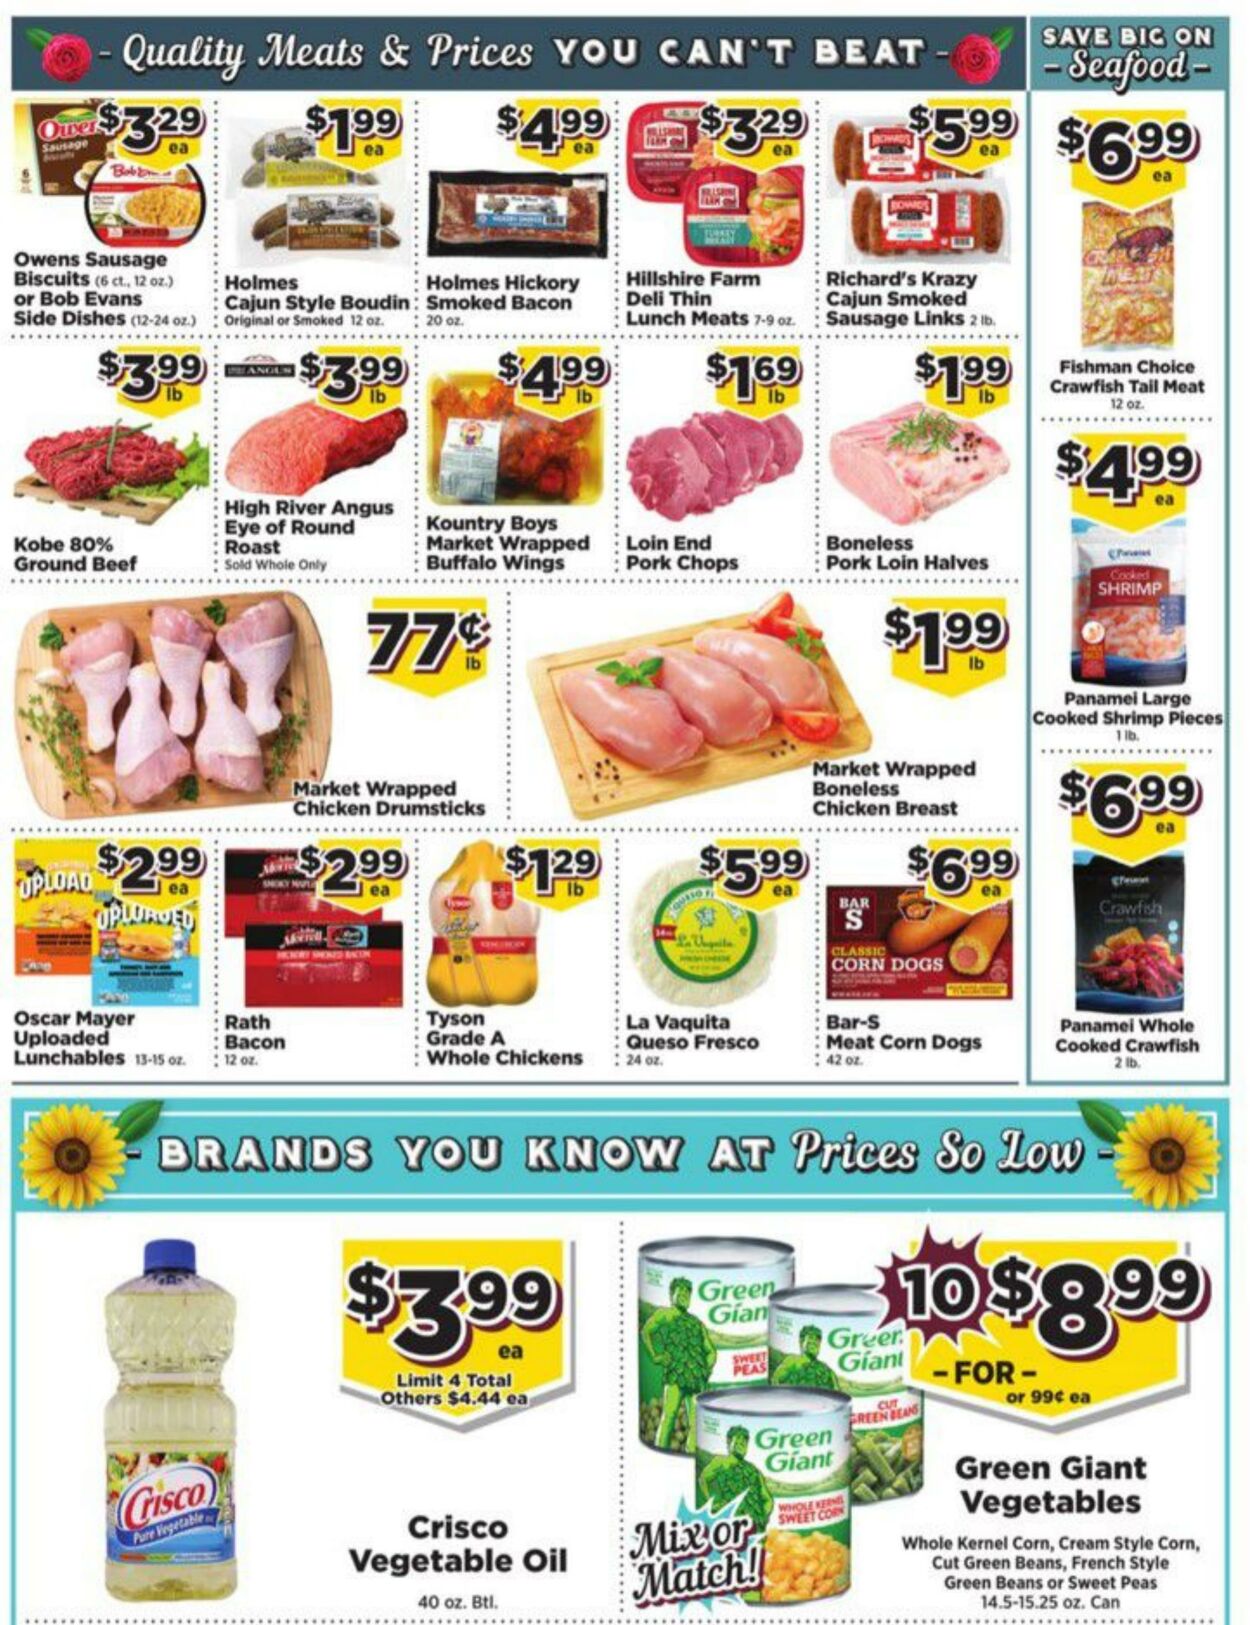 Weekly ad Your Food Town 03/22/2023 - 03/28/2023